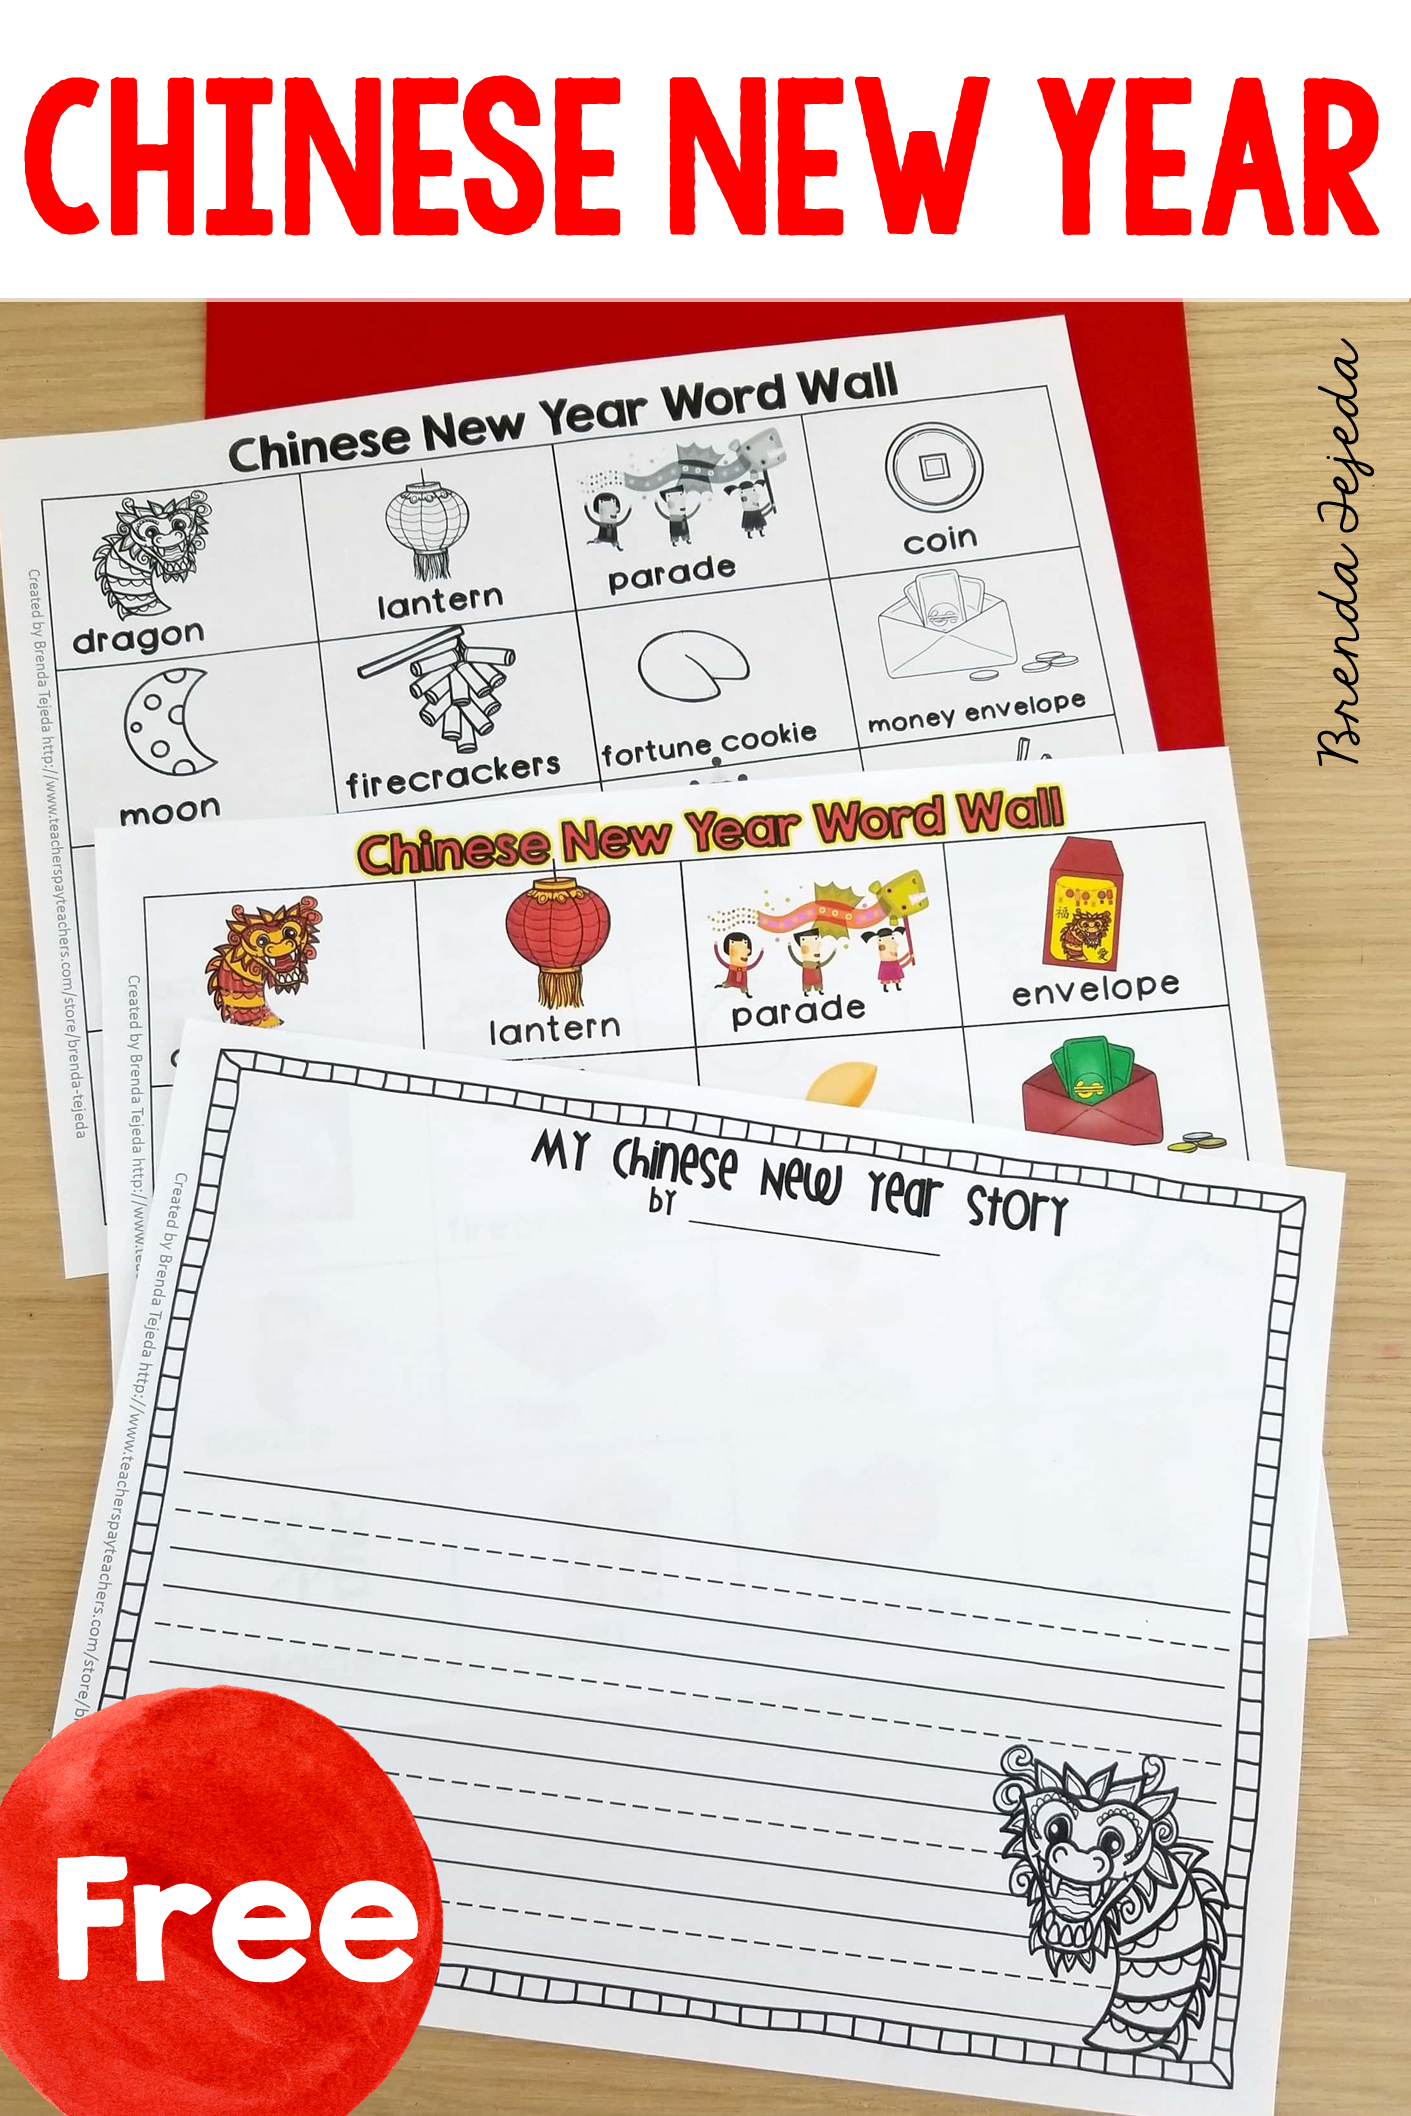 Free: Chinese New Year Word Wall And Stationary- Writing